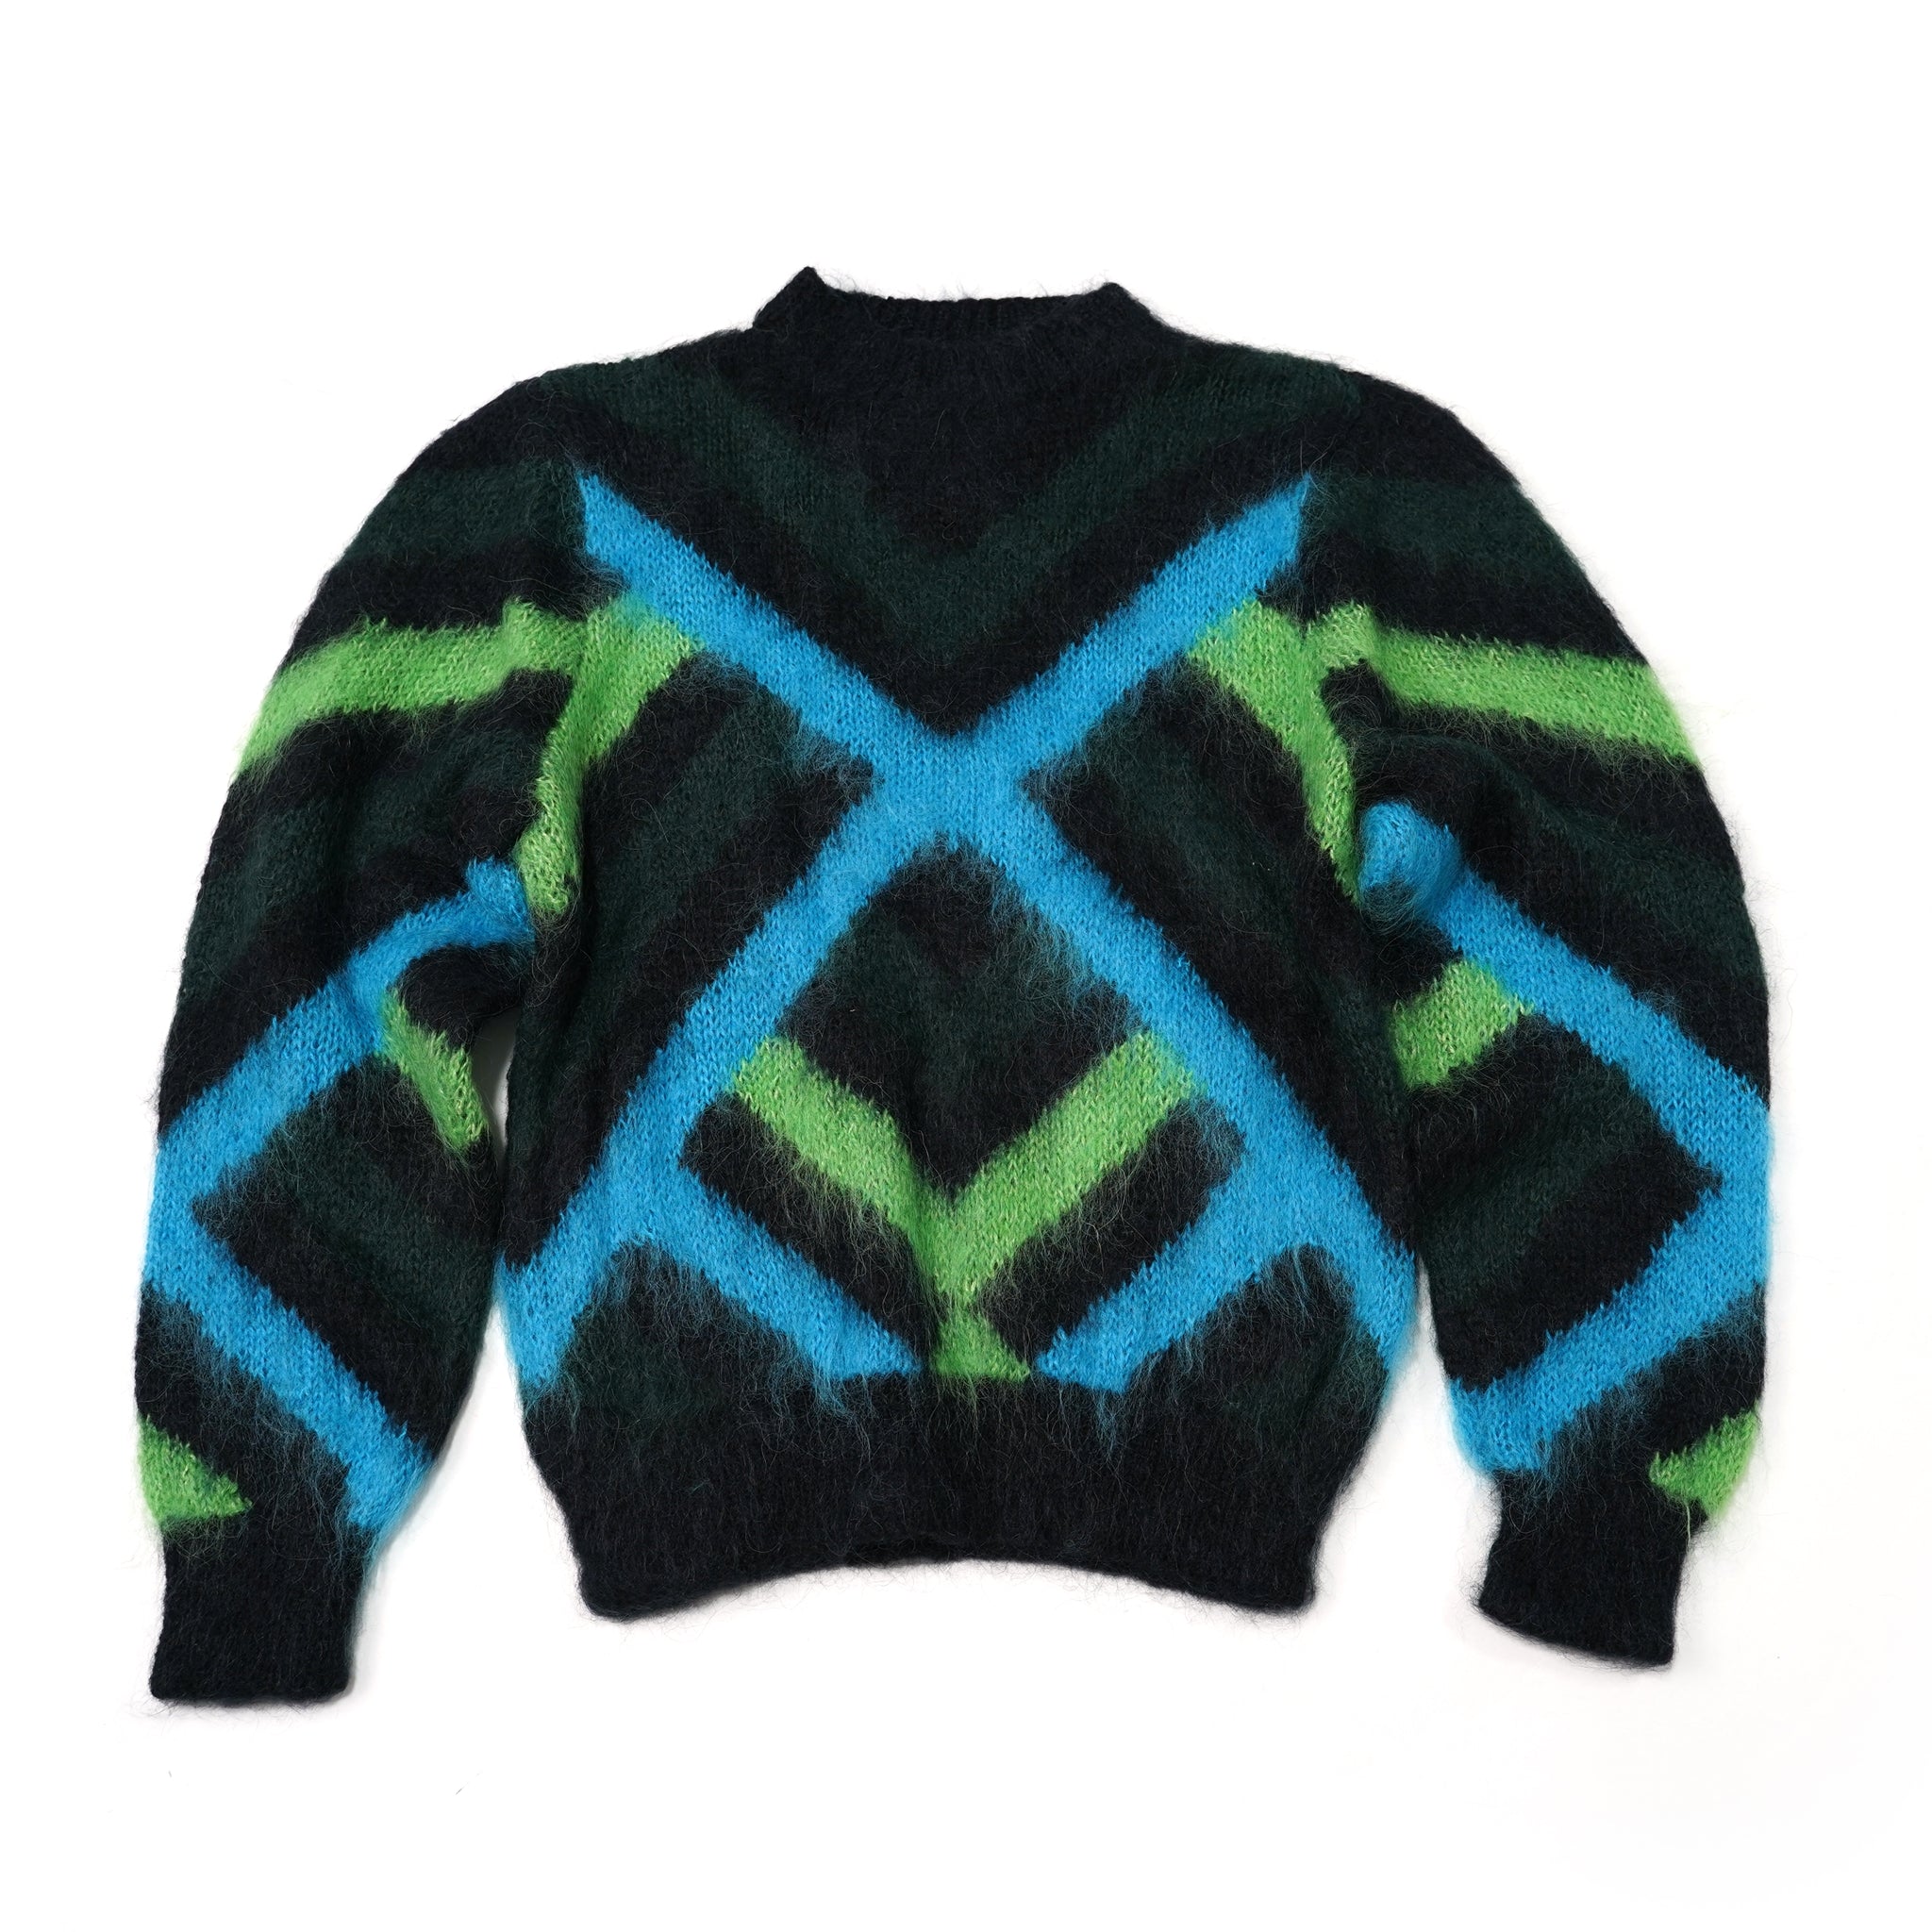 No:F12SW01 | Name:Sweater | Color:Black Green | Size:S【LALO CARDIGANS_ラロカーディガンズ】